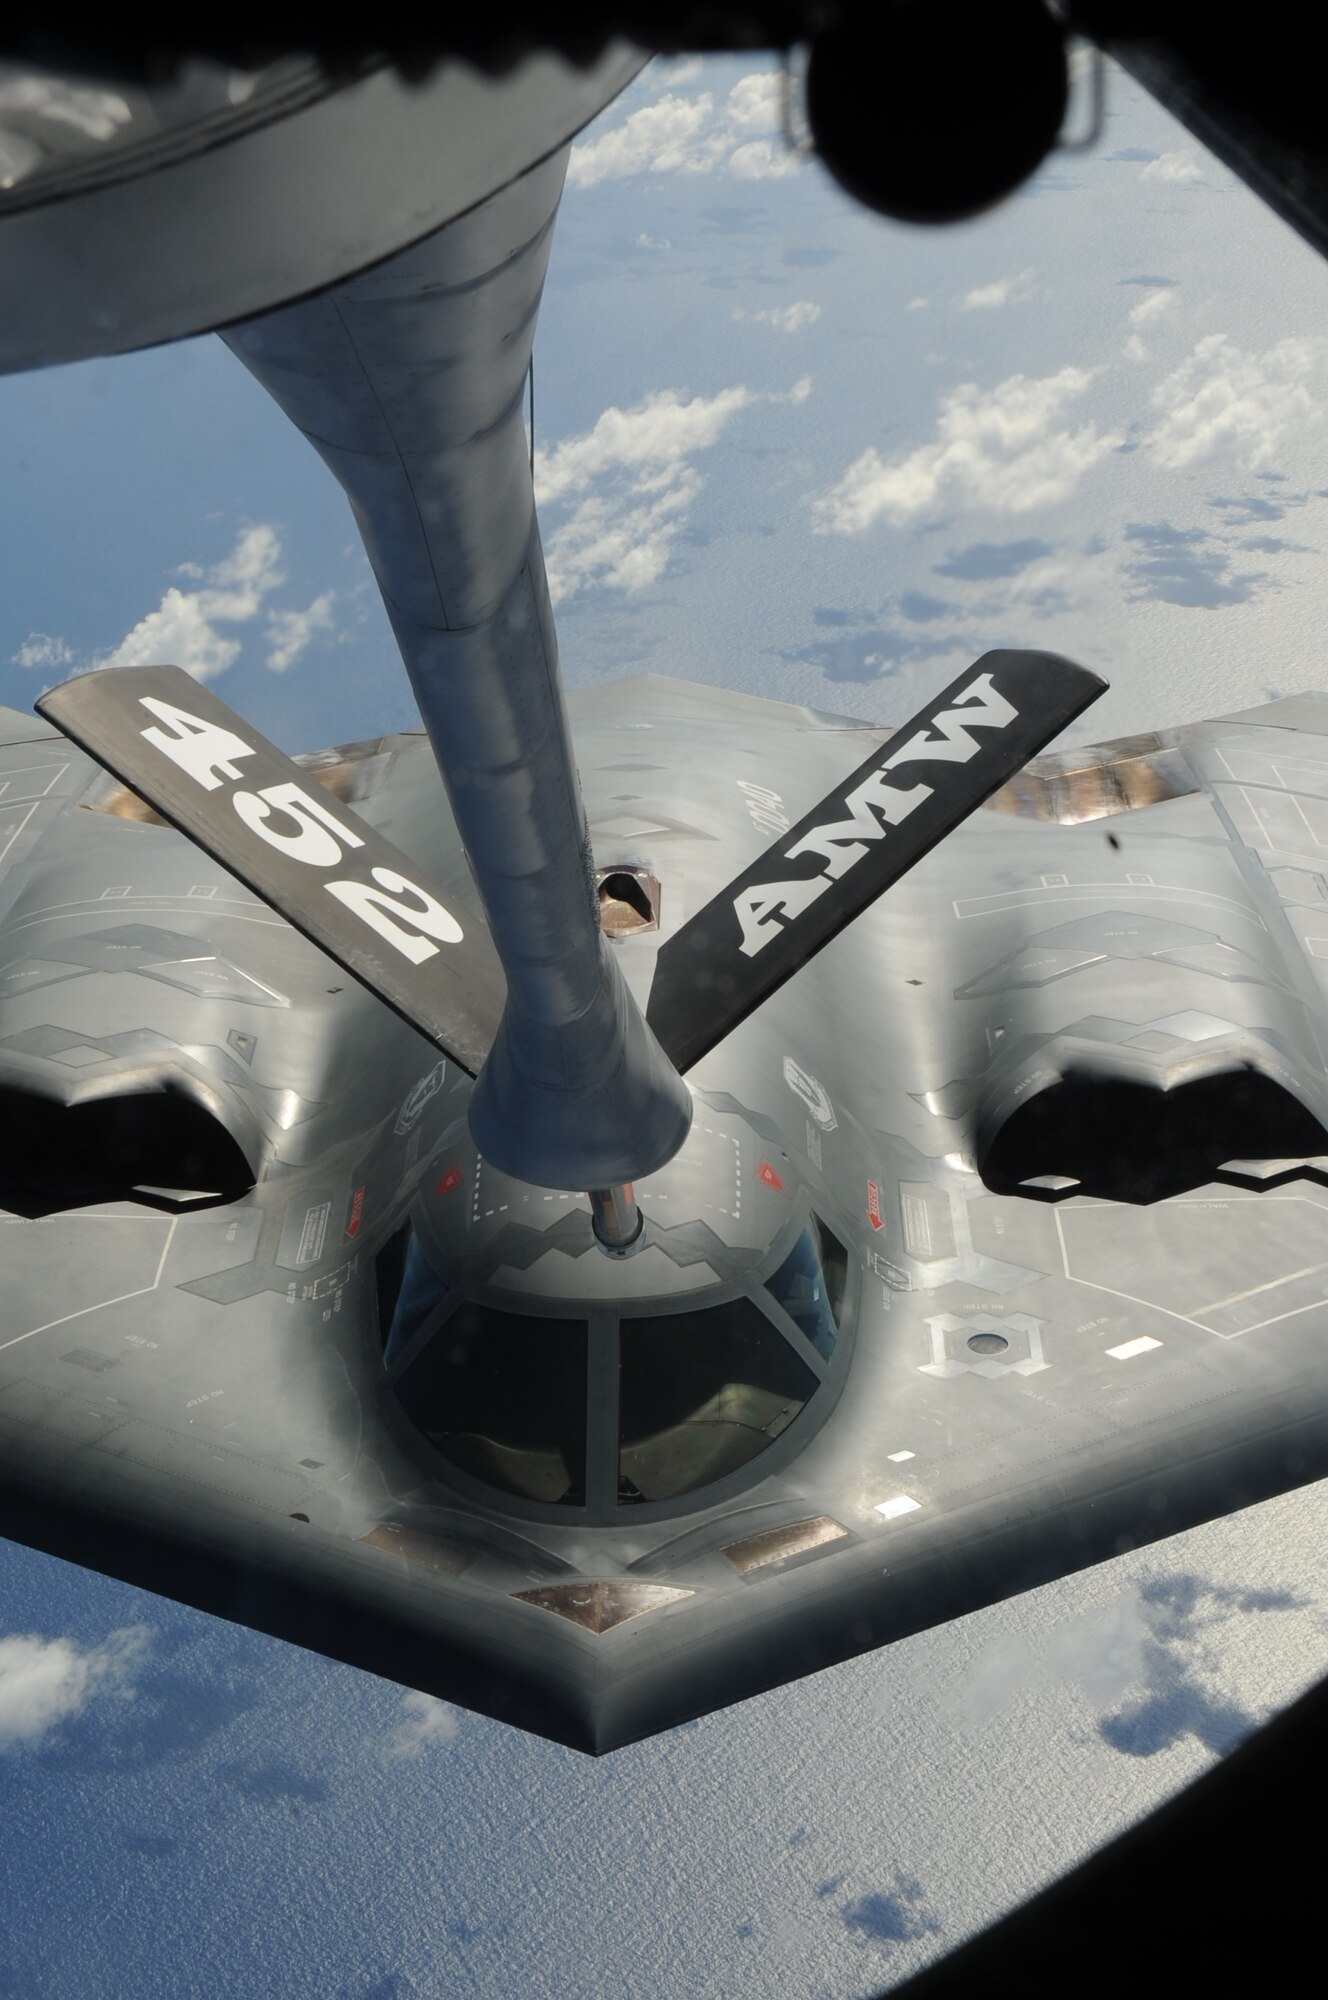 ANDERSEN AIR FORCE BASE, Guam-- A B-2 Spirit is refueled by a KC-135 Stratotanker over the Pacific Ocean. The 13th Expeditionary Bomb Squadron and 506th Expeditionary Air Refueling Squadron are currently deployed here in support of the Continuous Bomber Presence. (U.S. Air Force photo)